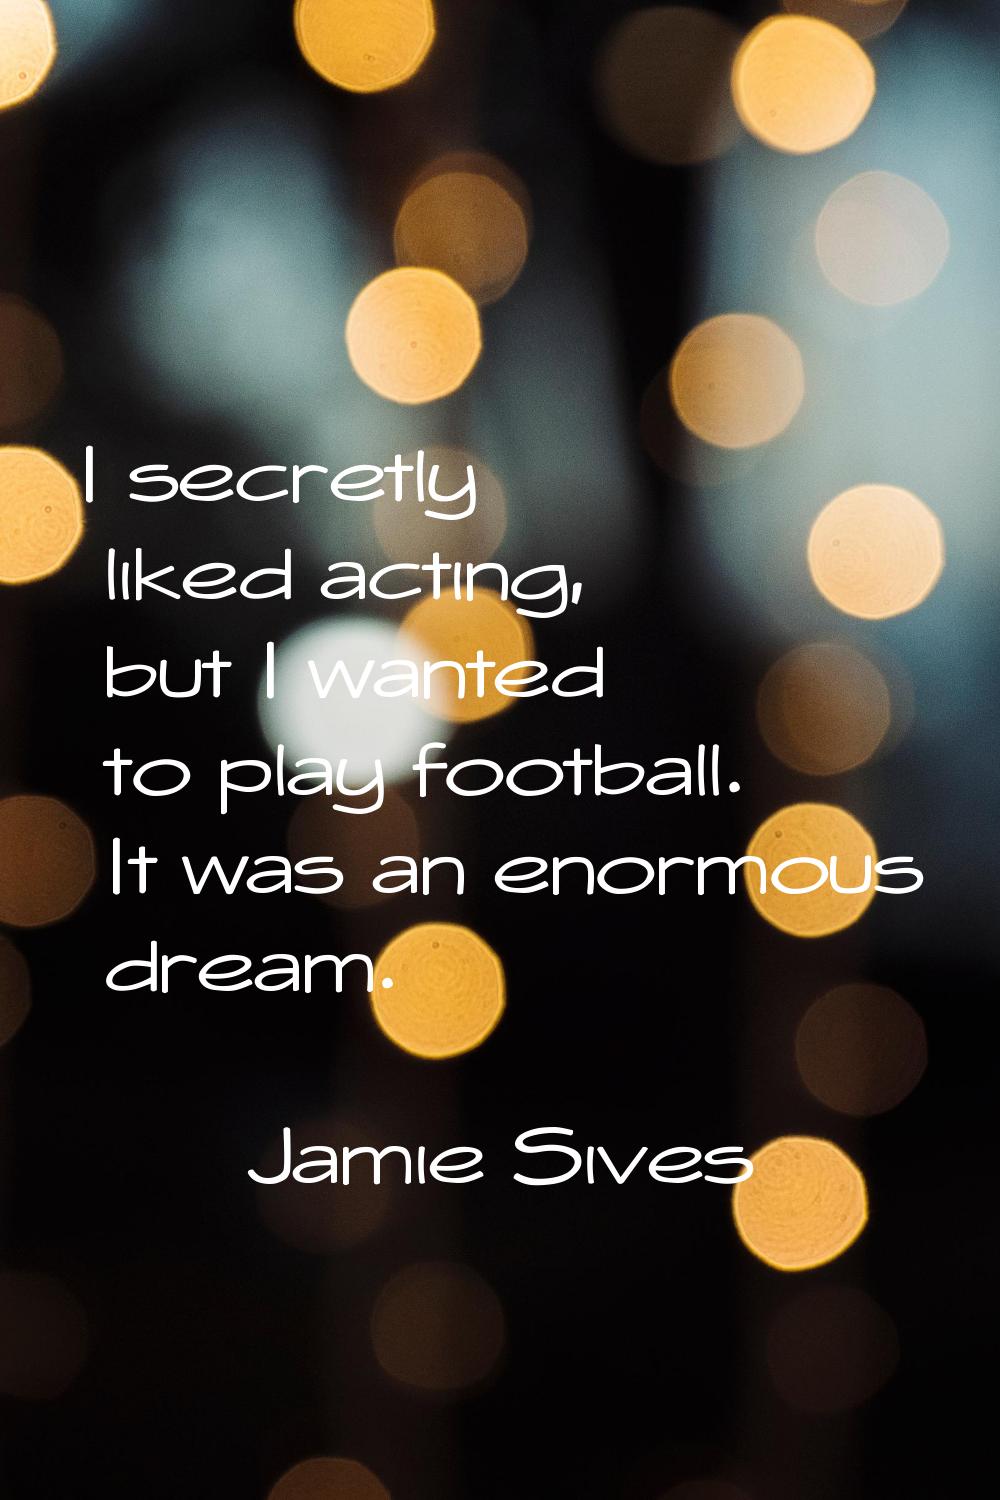 I secretly liked acting, but I wanted to play football. It was an enormous dream.